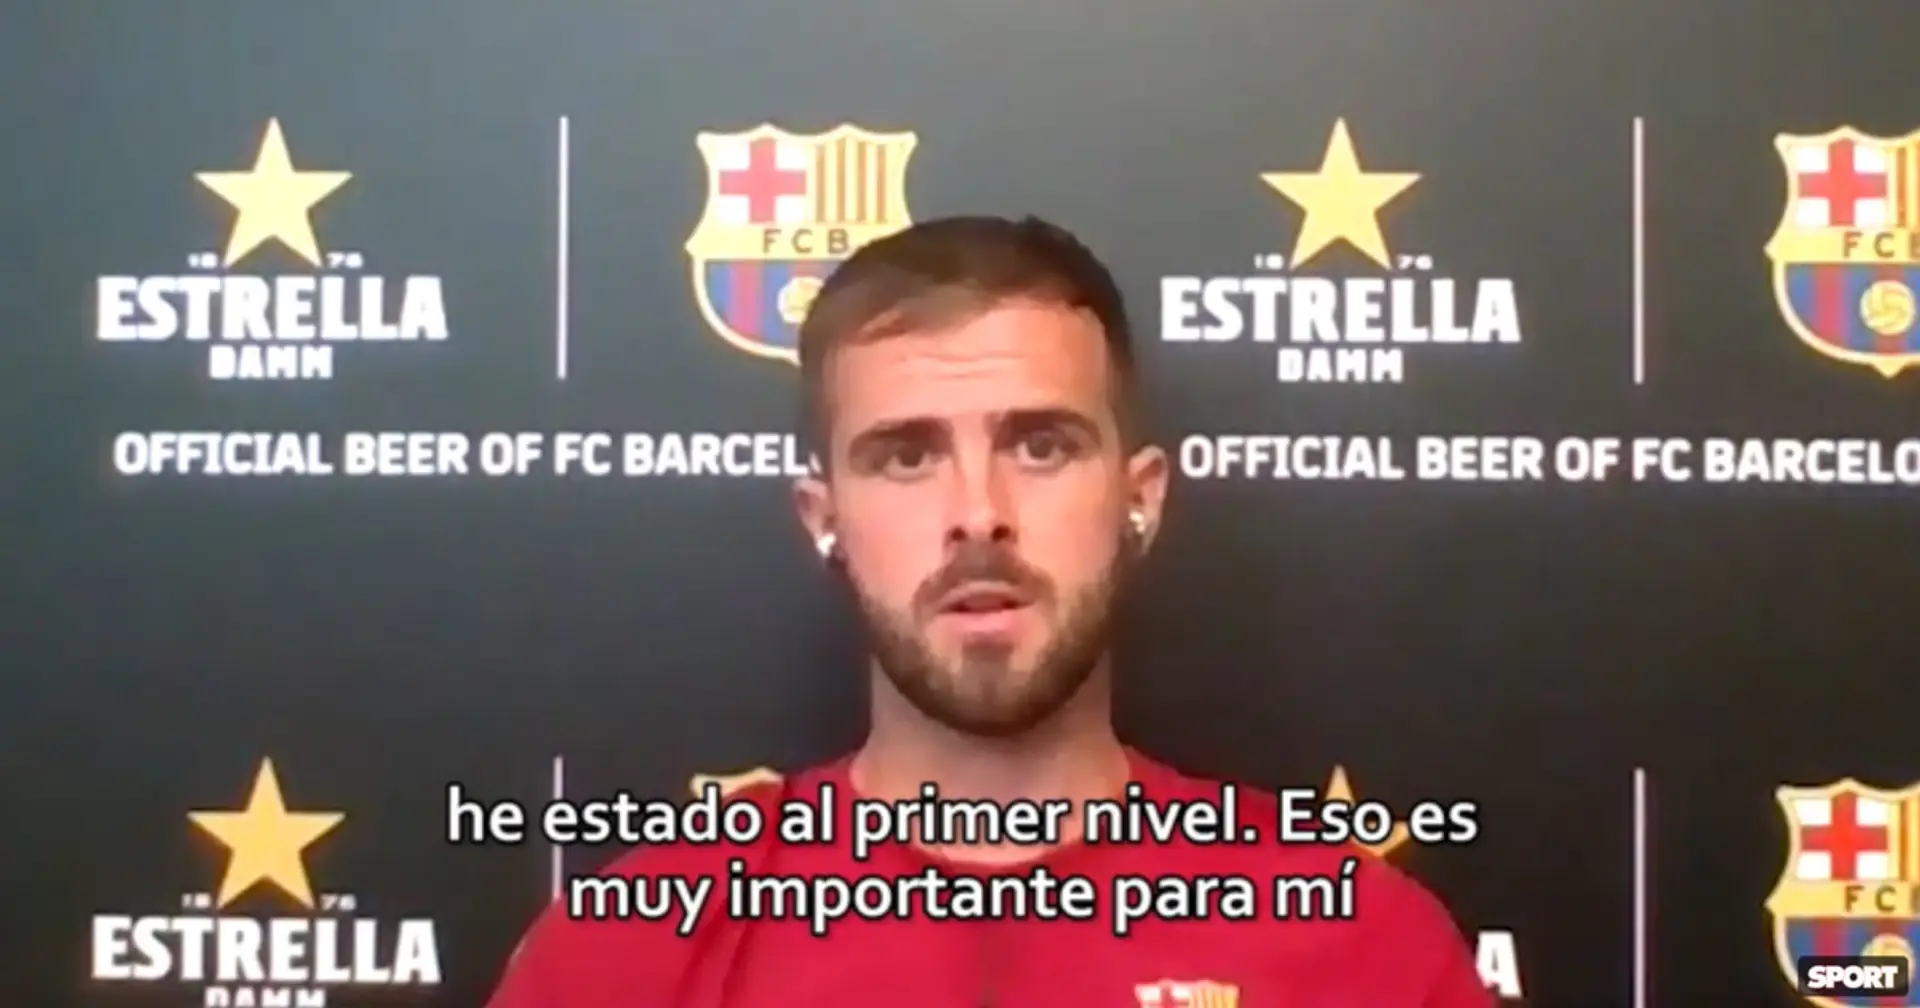 Pjanic reveals it took Barca four times to sign him during his career